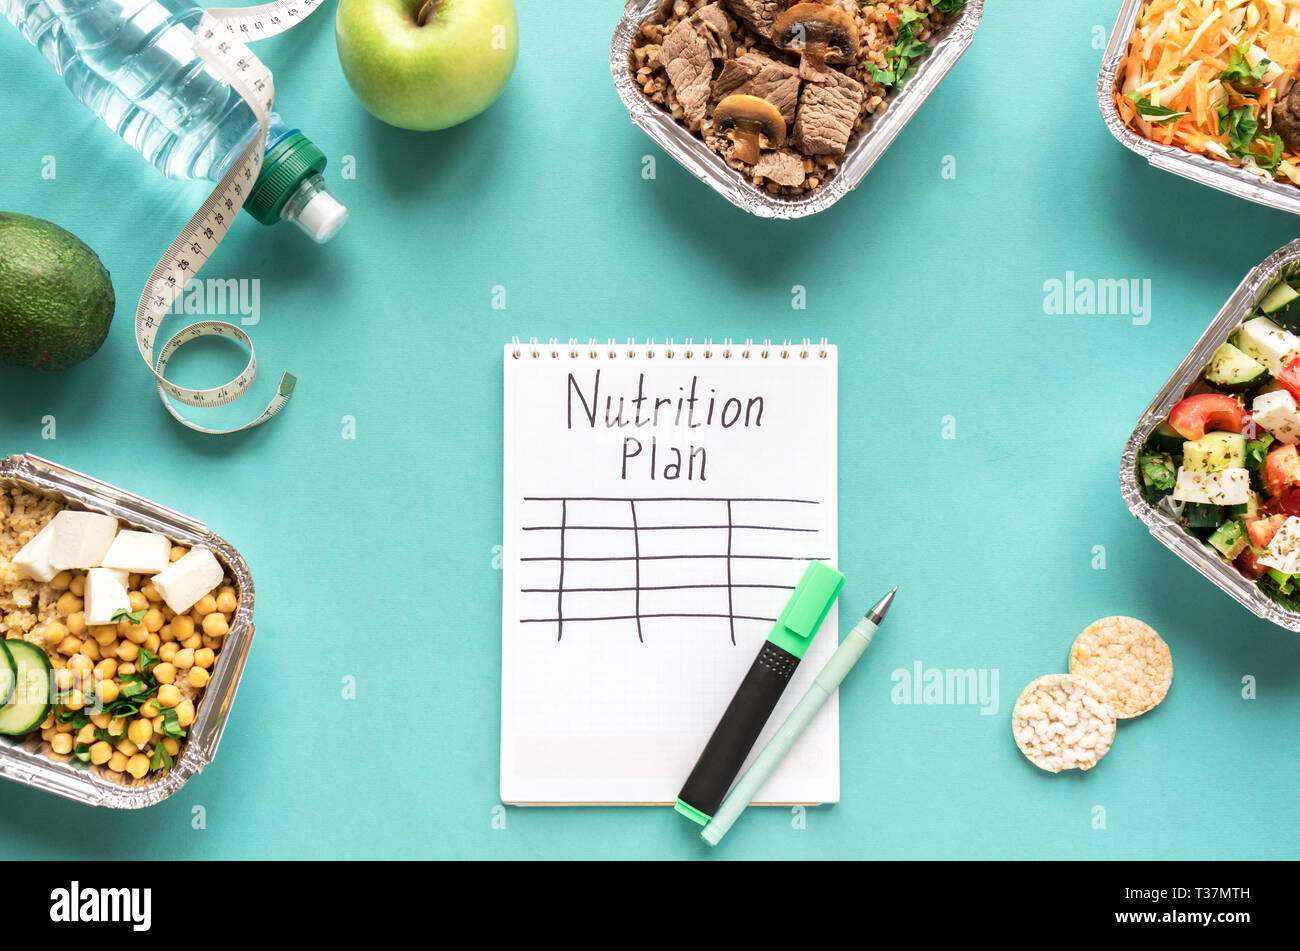 Nutrition meal plan mockup with healthy food delivery. Fitness nutrition for diet. Daily meals on blue, top view, copy space. Stock Photo